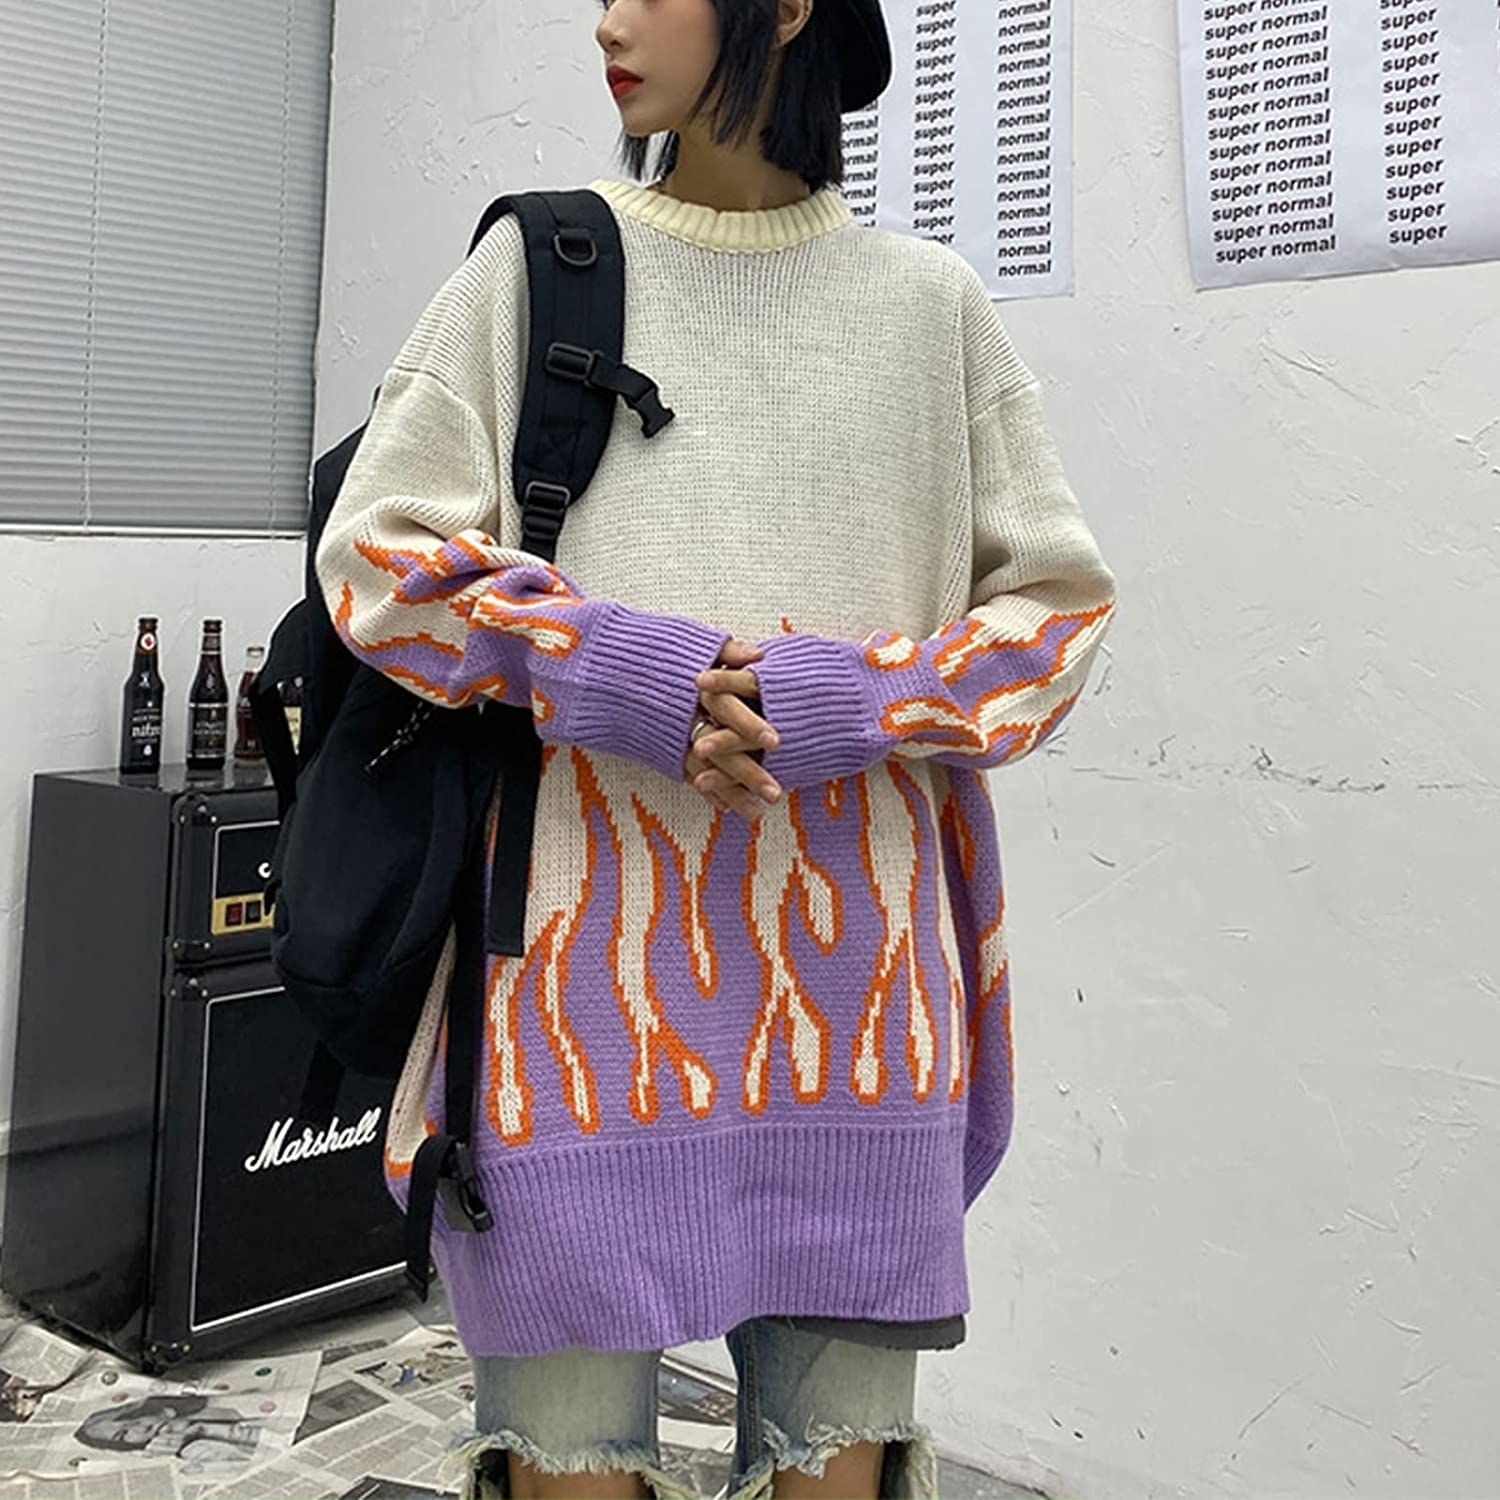 large sweater with purple flames on bottom and sleeves